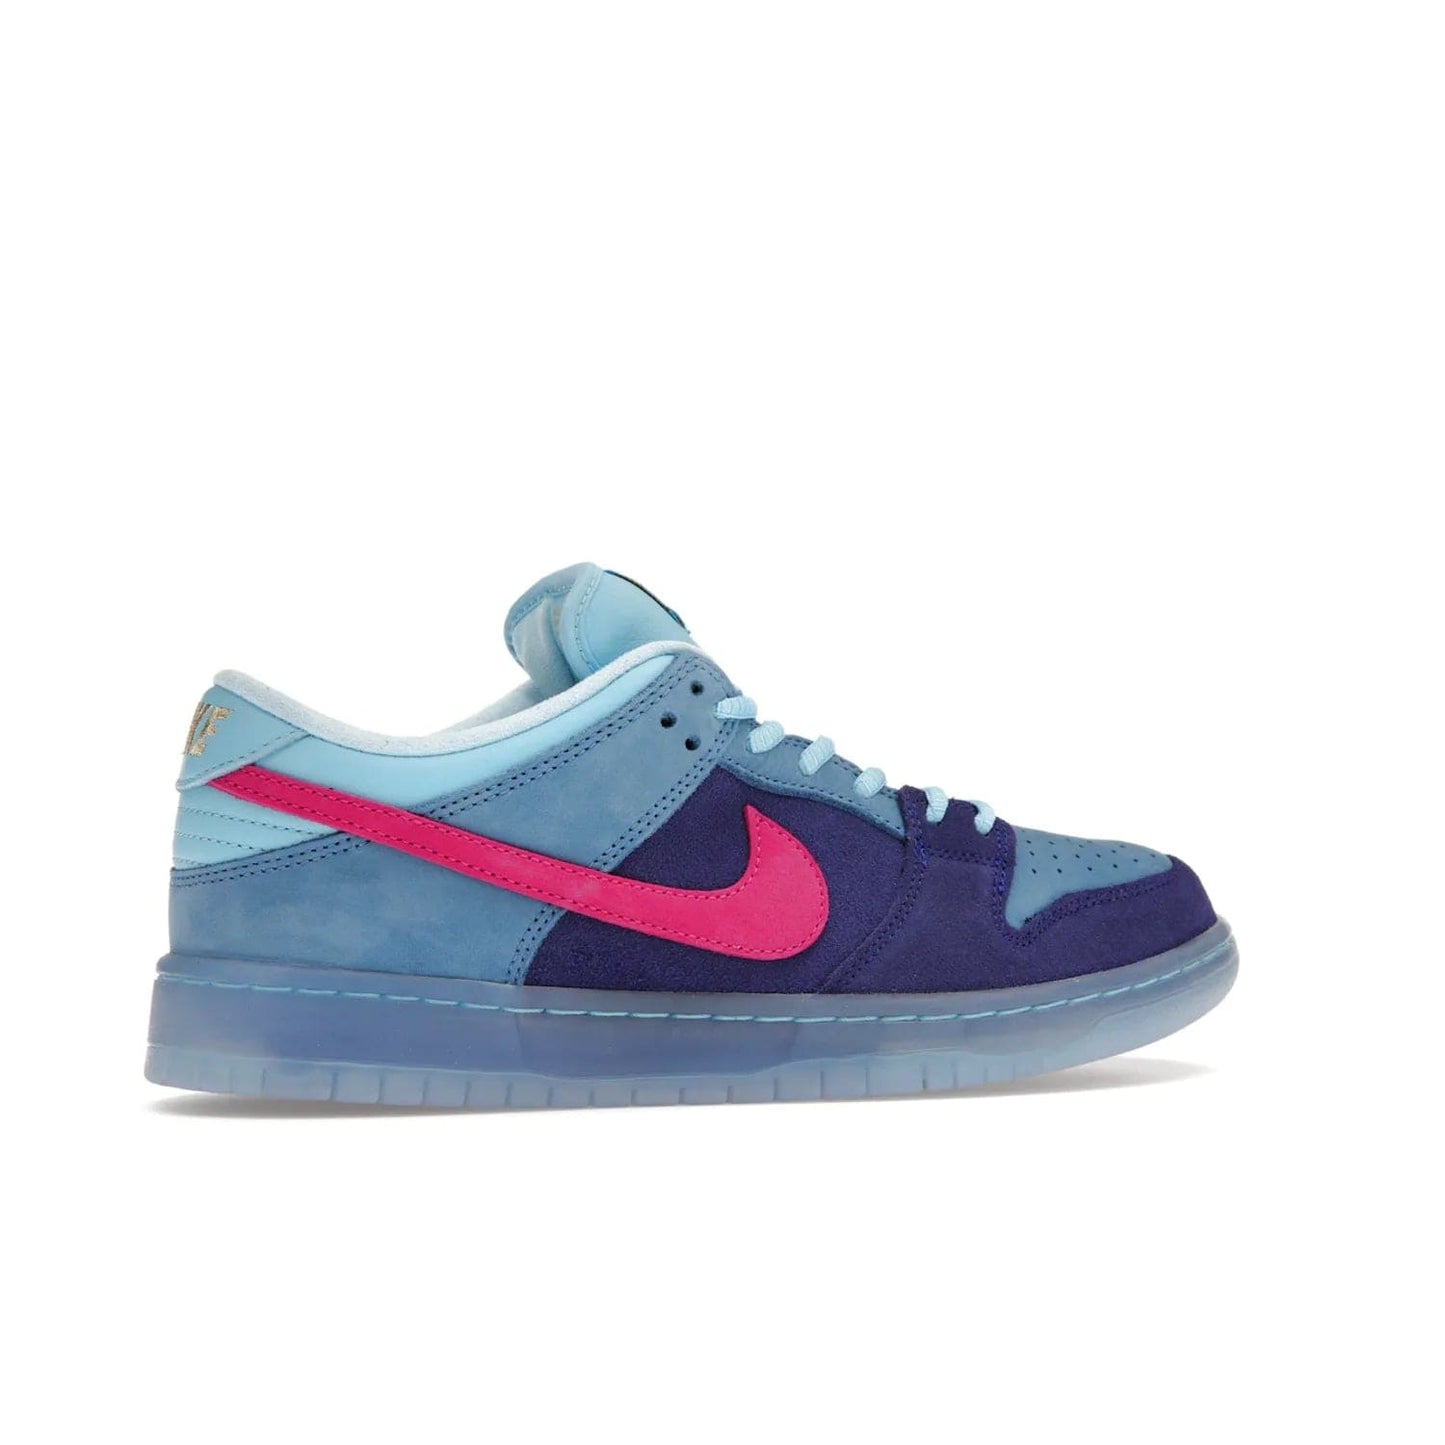 Nike SB Dunk Low Run The Jewels - Image 35 - Only at www.BallersClubKickz.com - The Nike SB Dunk Low Run The Jewels pays tribute to the Run the Jewels 3 album cover. It features a blue suede upper with pink suede accents, gold branding and 3 lace sets. RTJ insoles complete this limited edition sneaker. Get it now for your shoe collection.